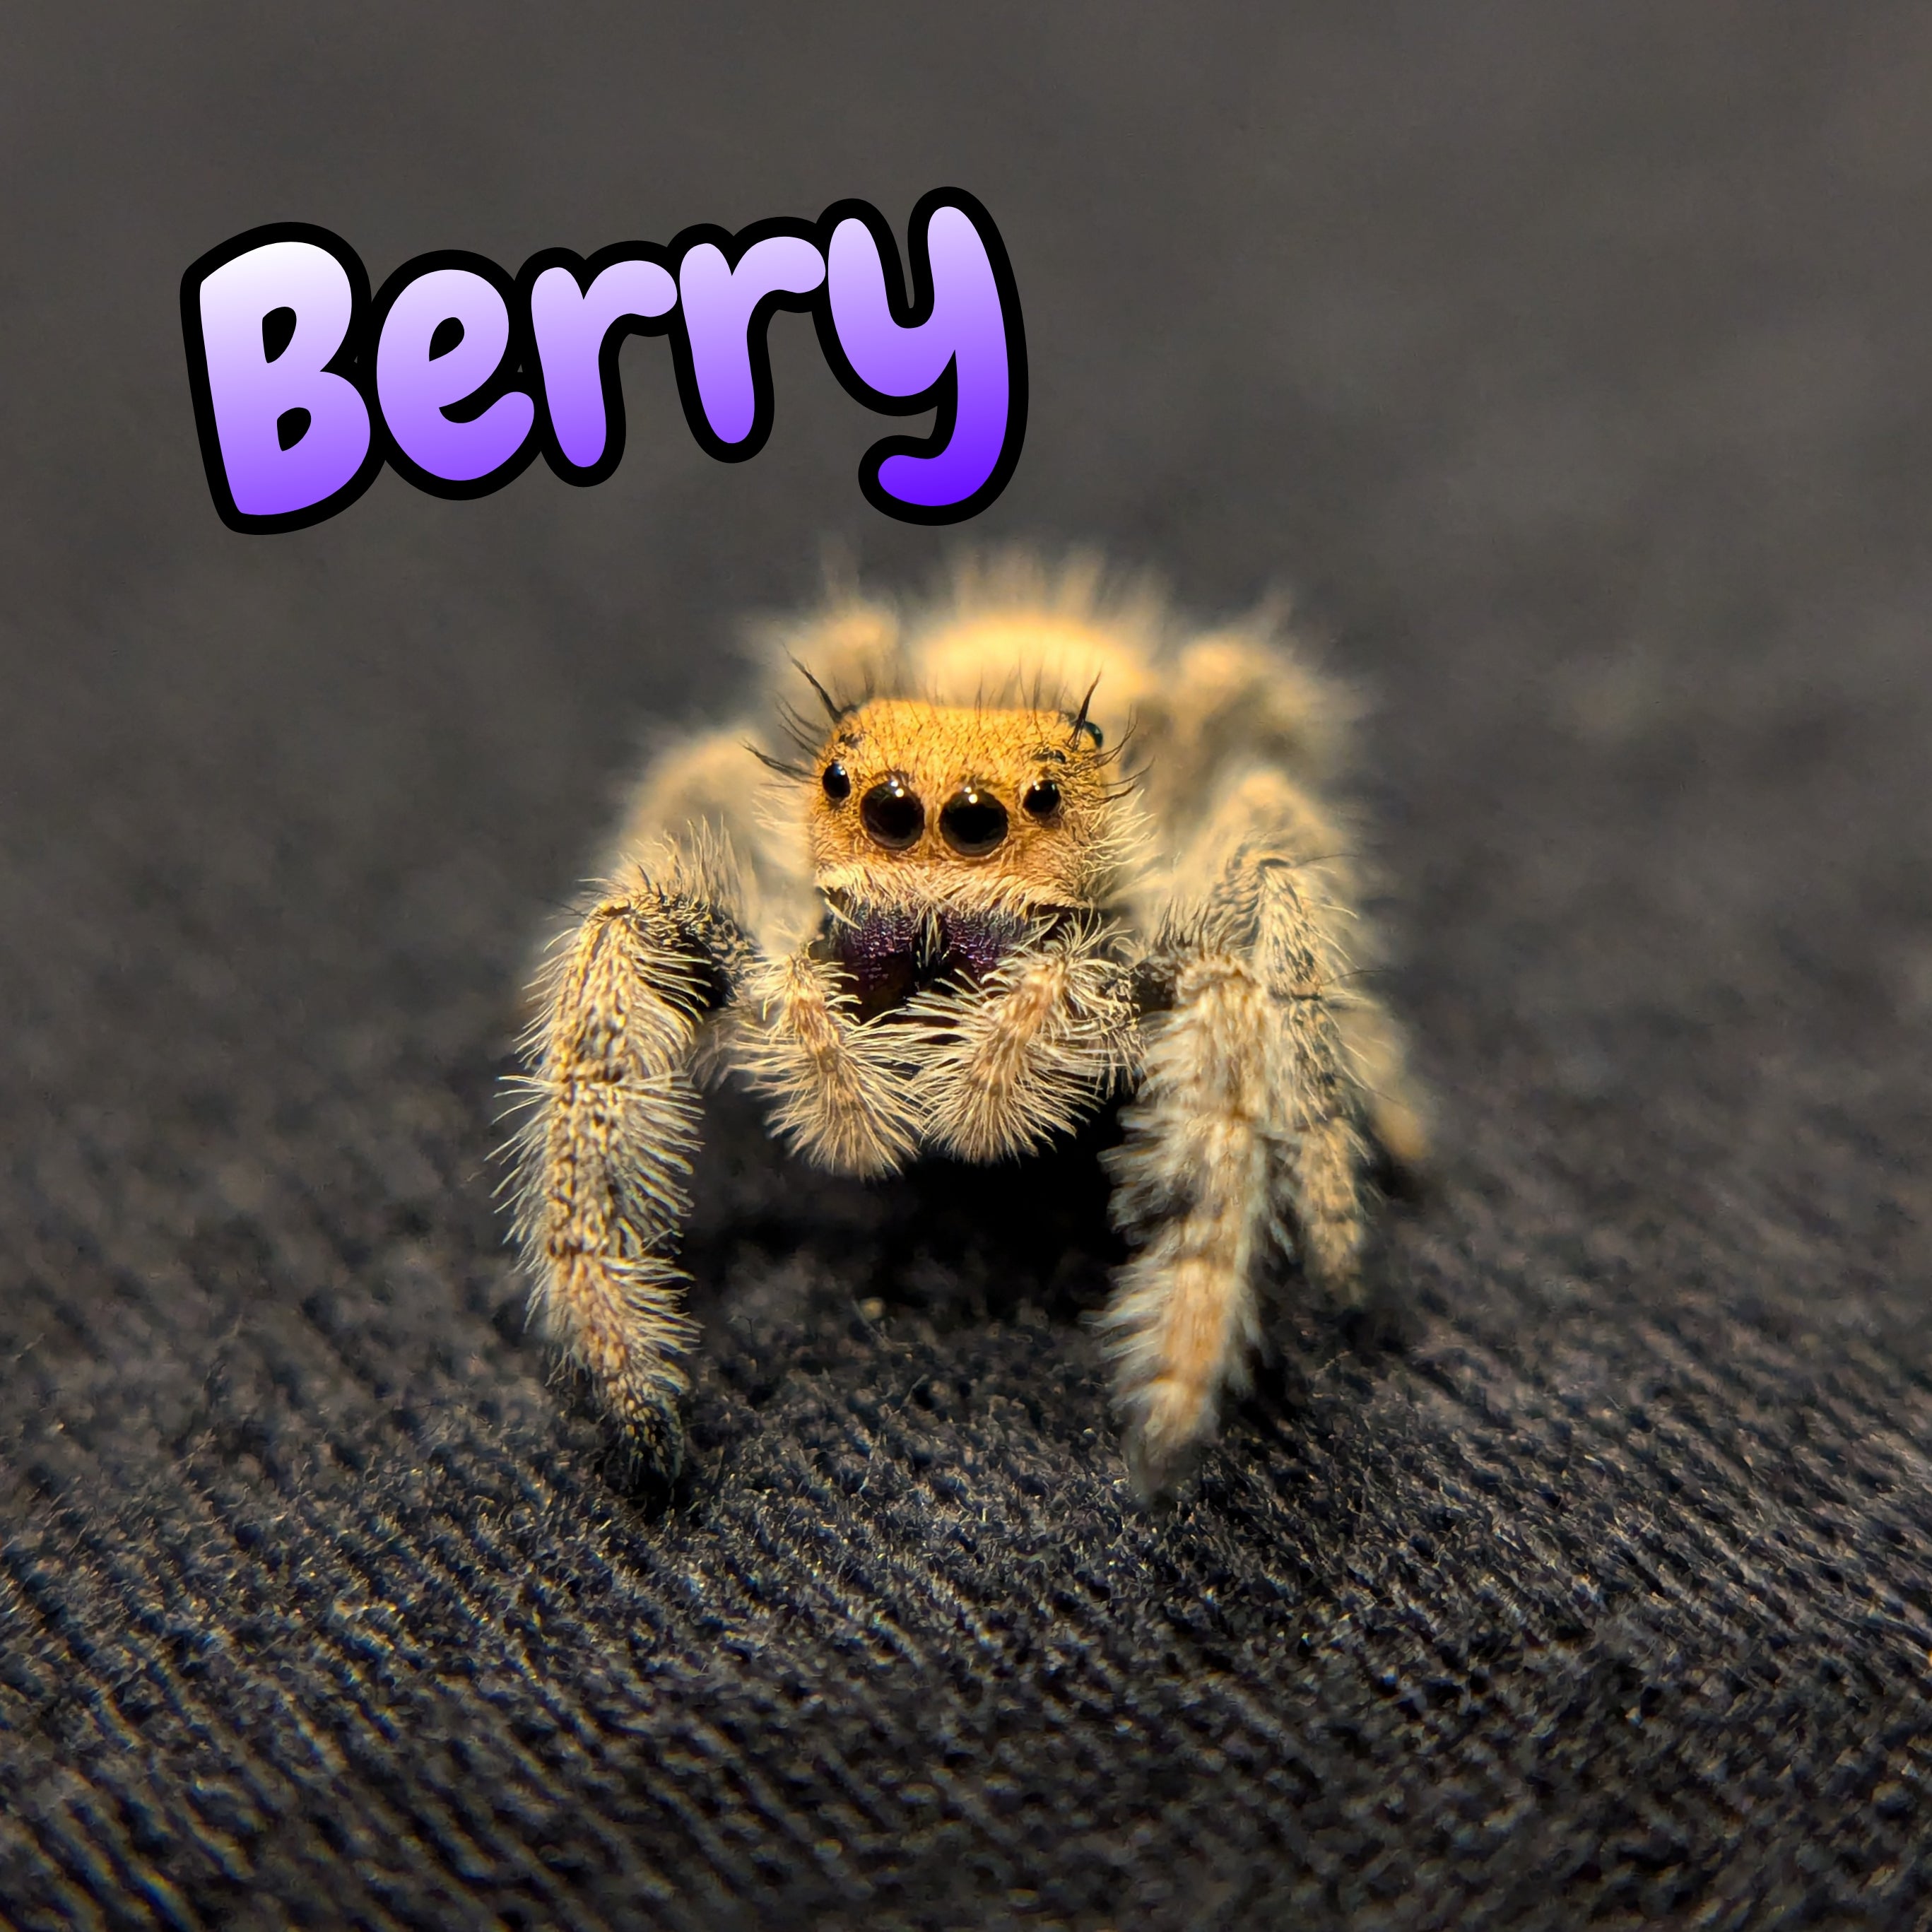 Regal Jumping Spider "Berry"